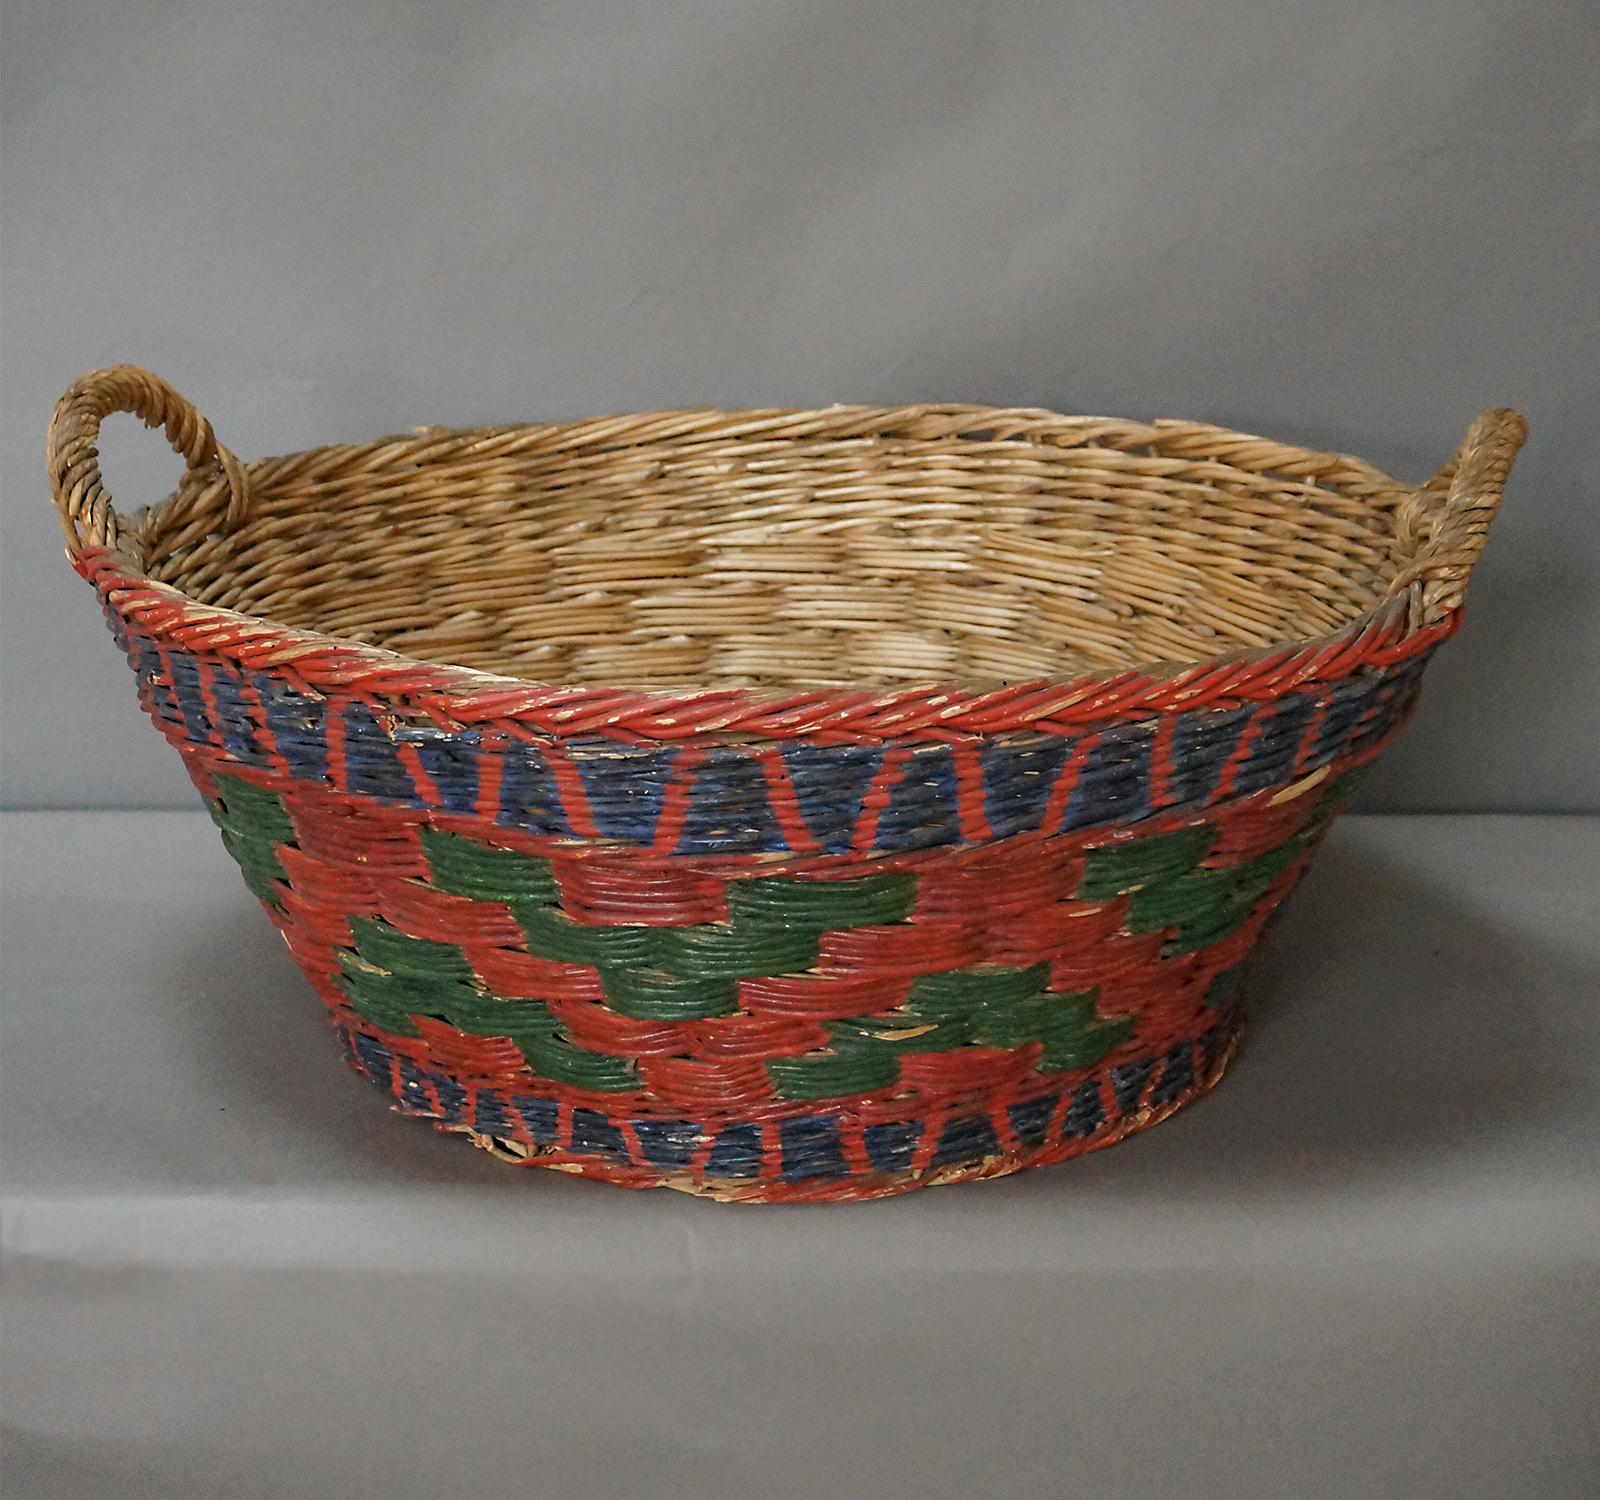 Wedding basket in red, blue and green paint, Schwalm region, Germany, circa 1850. handwoven and hand painted, these baskets were gifts to the bride and used in the wedding ceremony to carry her dowry.